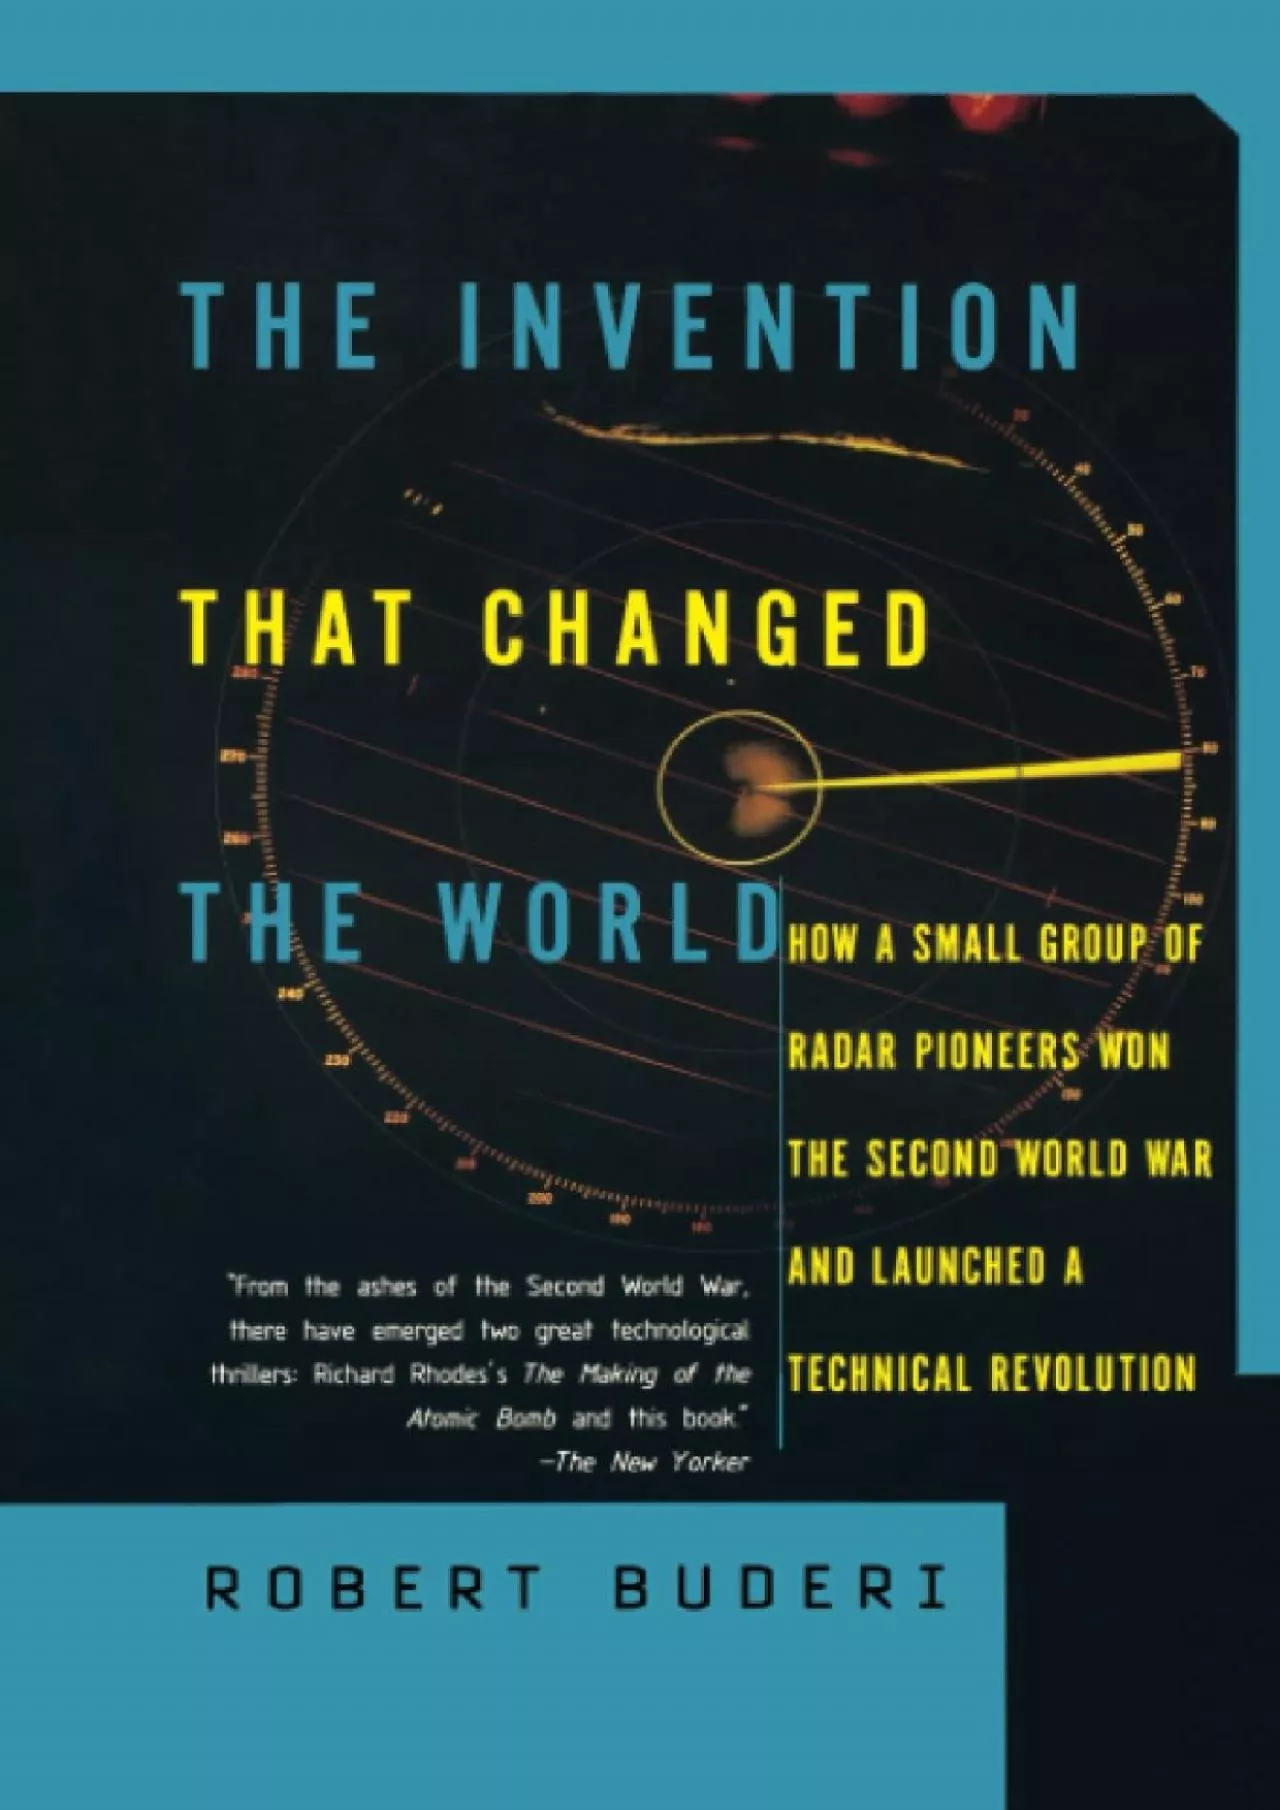 [DOWNLOAD]-The Invention That Changed the World: How a Small Group of Radar Pioneers Won